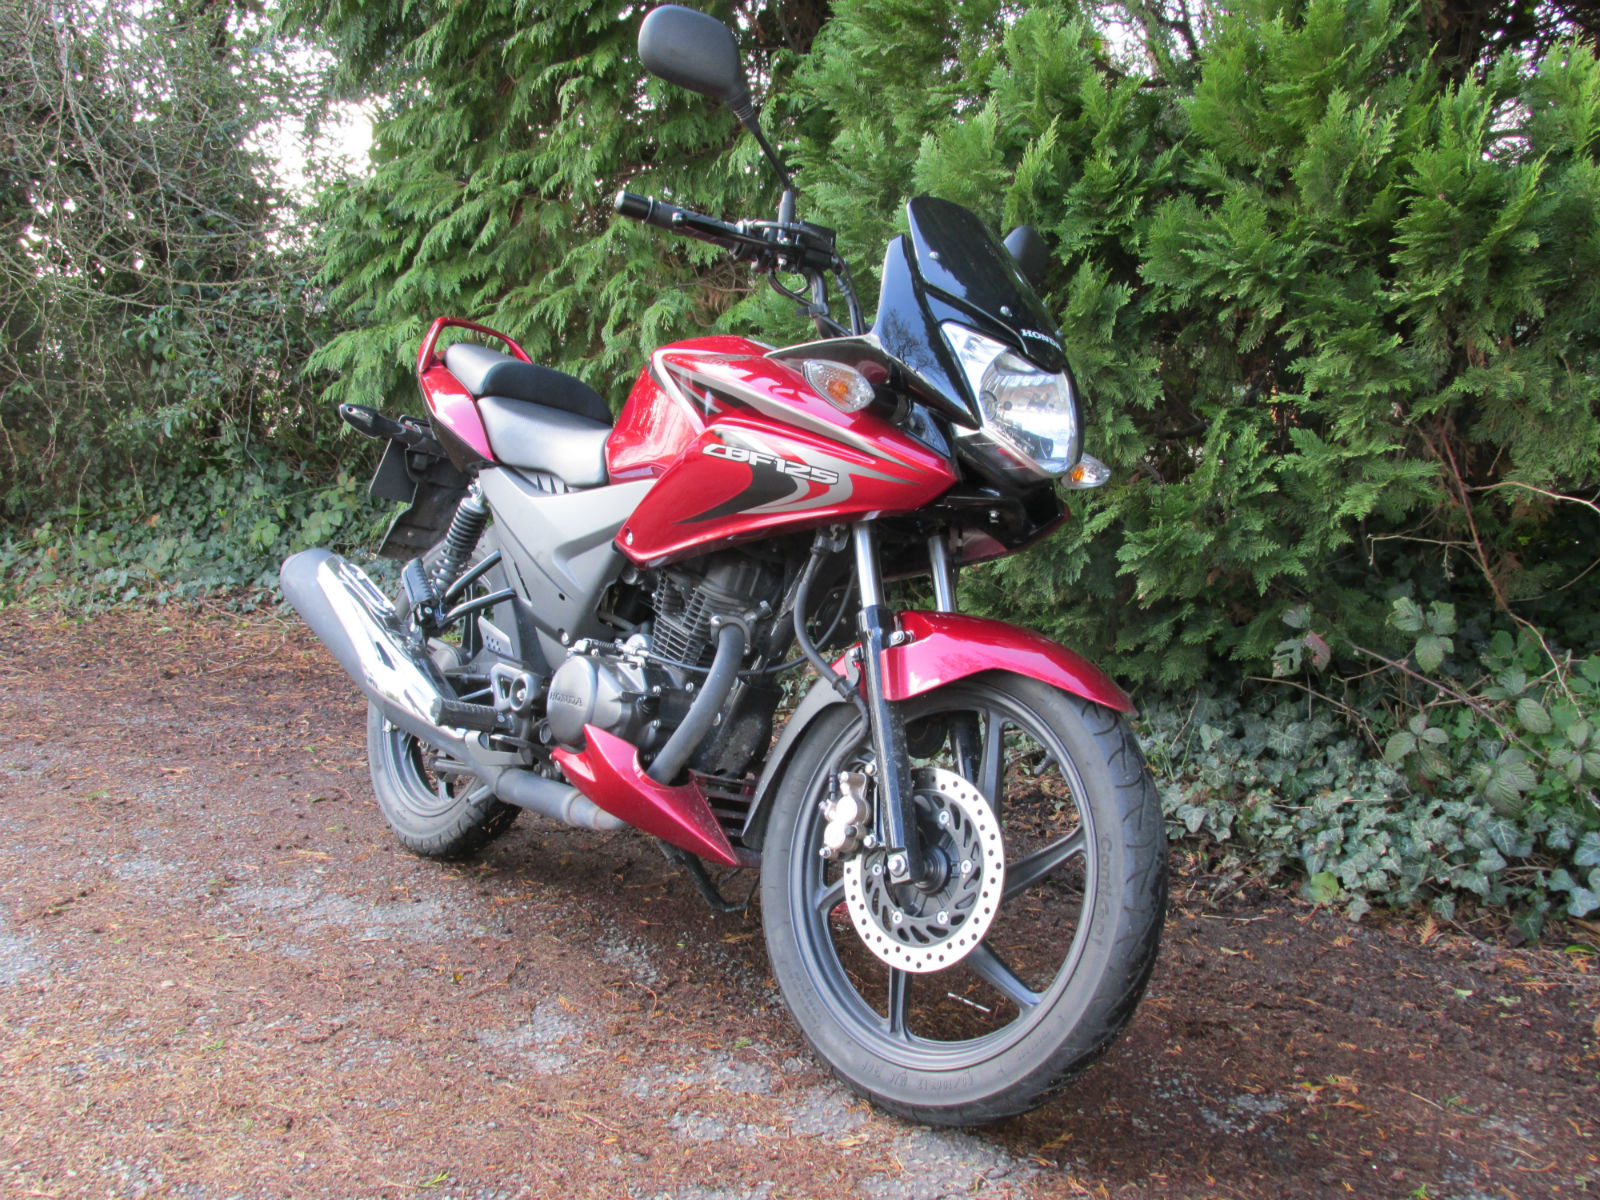 Review: One week with a Honda CBF125